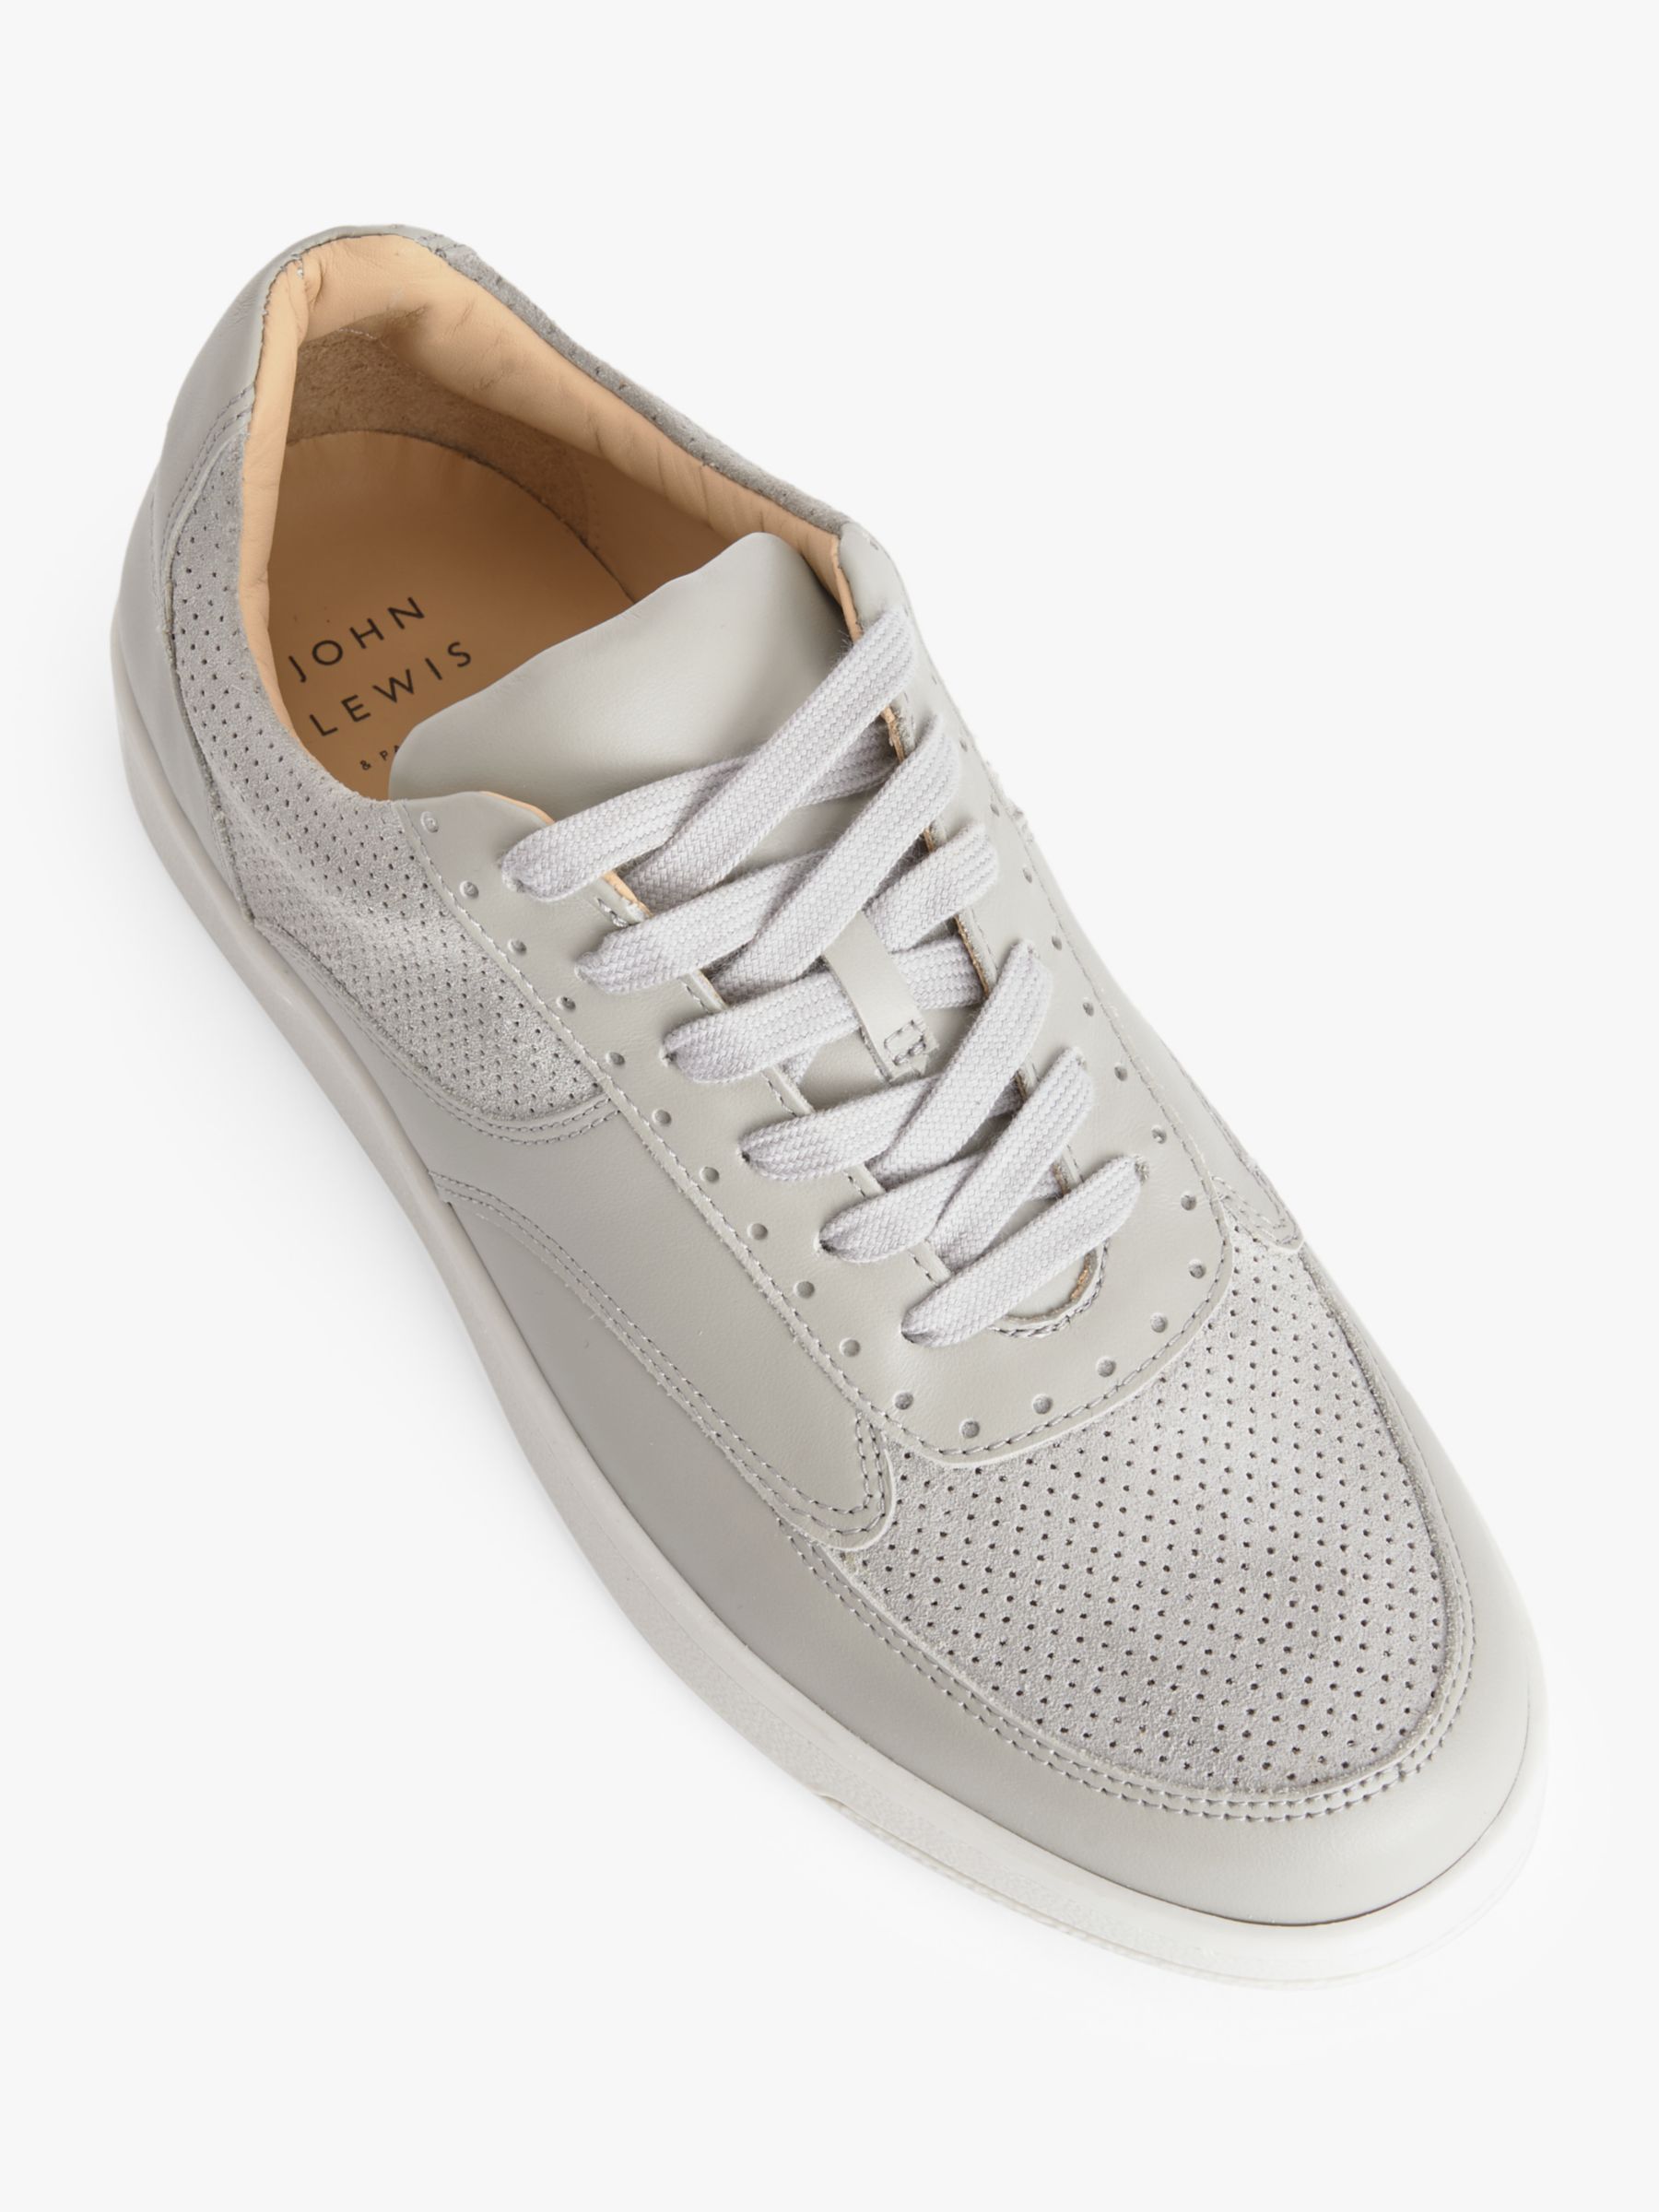 John Lewis Evelyn Leather Perforated Trainers, Grey at John Lewis ...